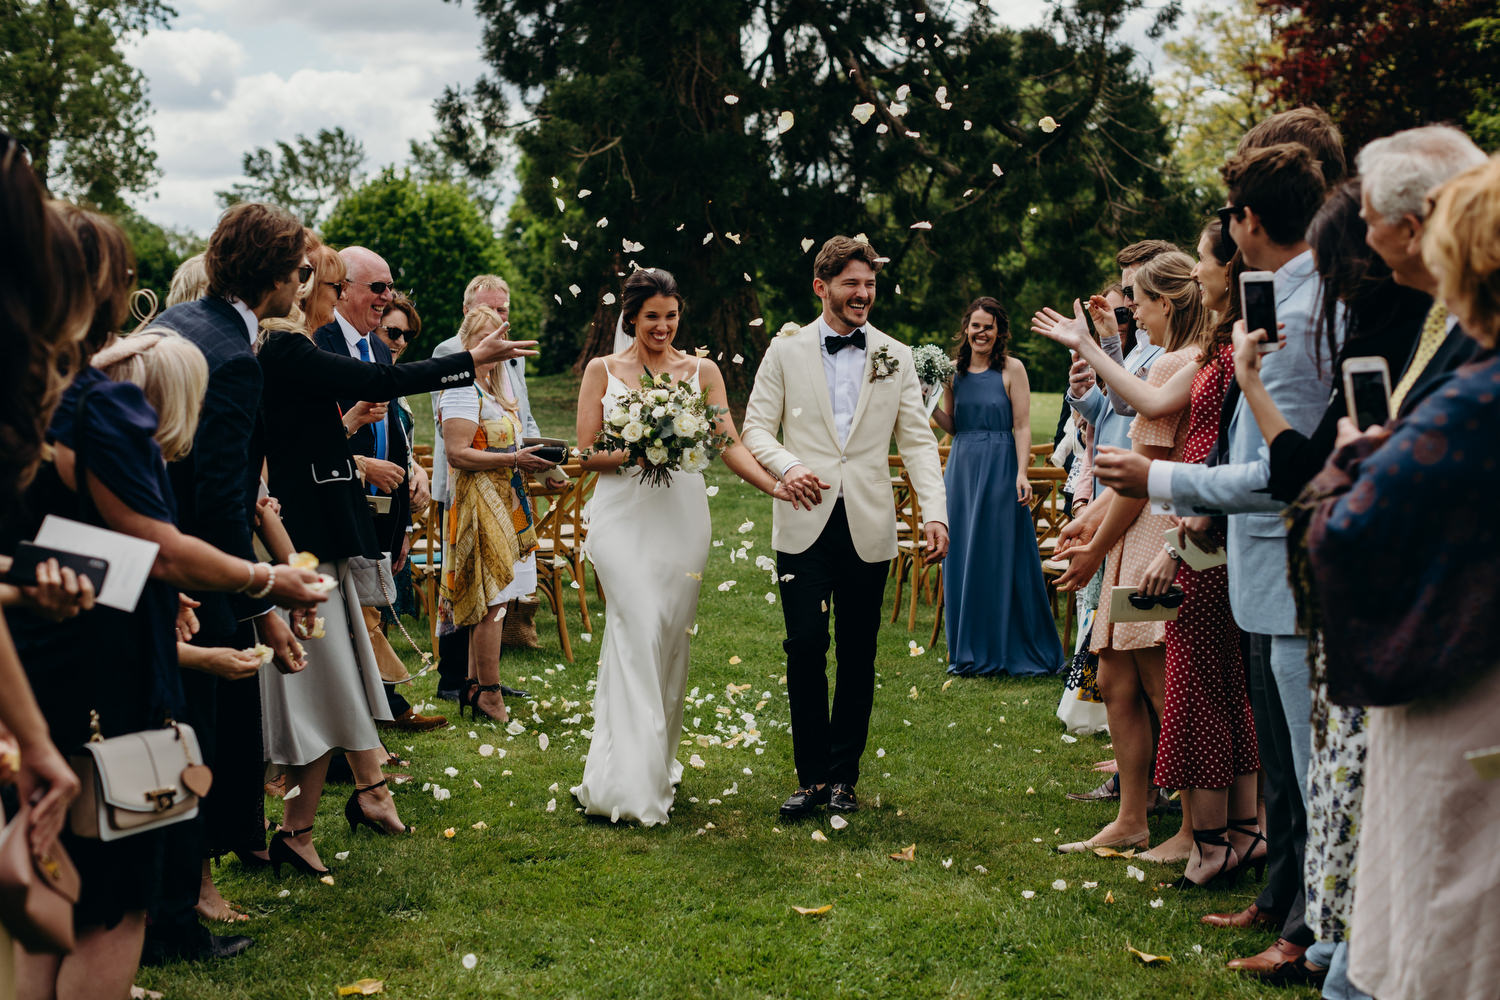 bride and groom get showered with confetti in outdoor ceremony